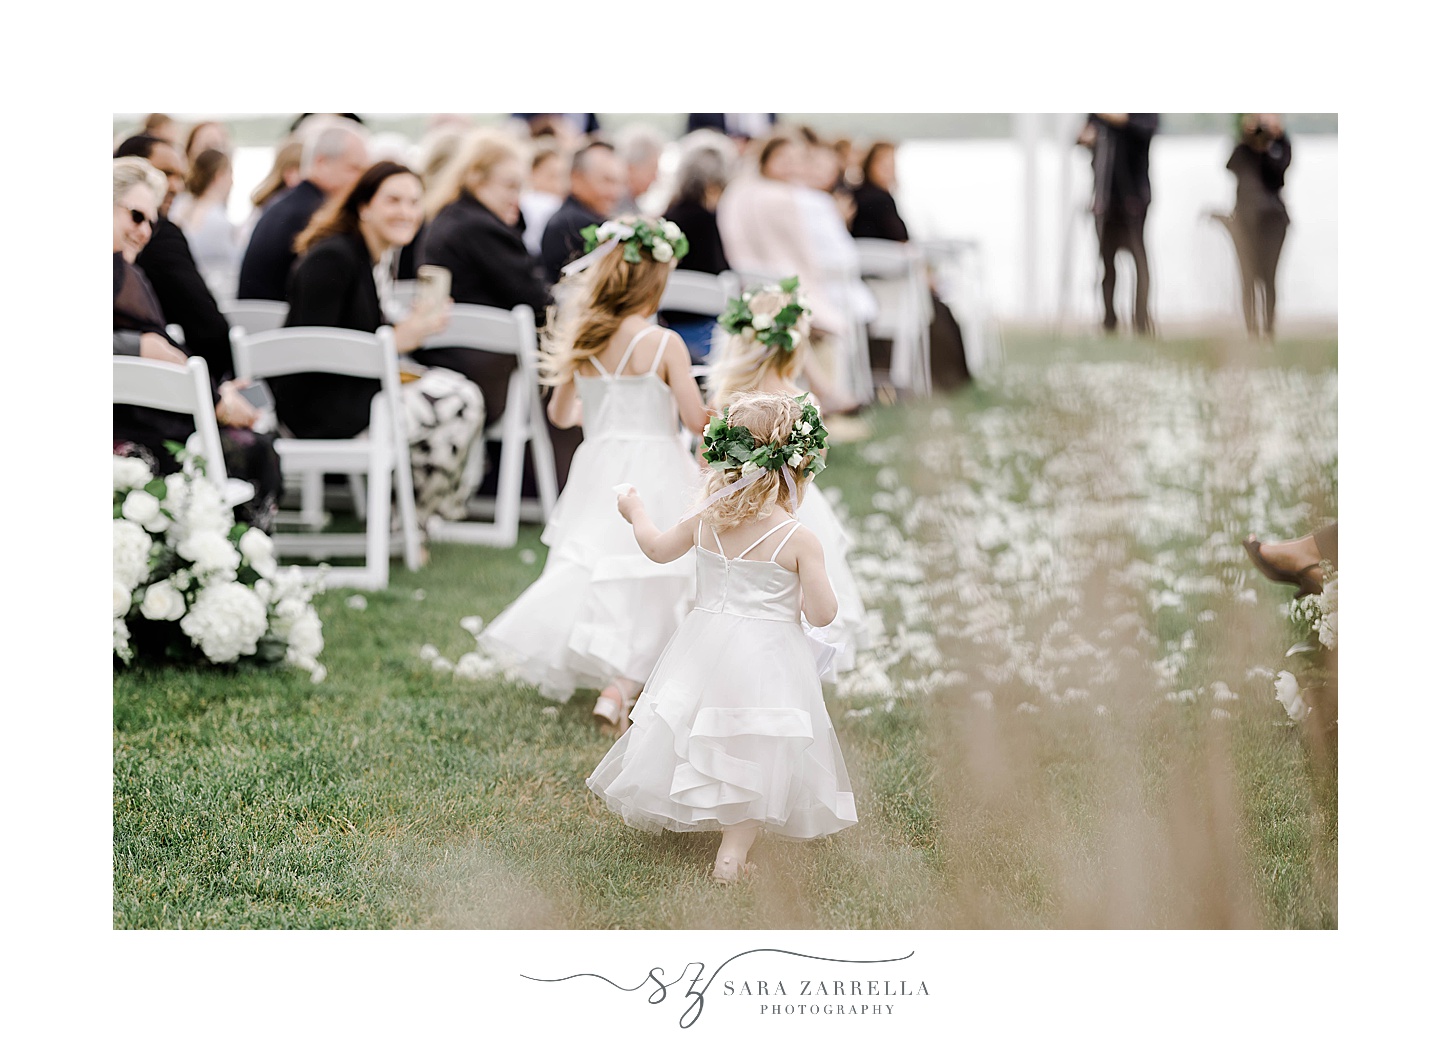 flower girls run down aisle in white dresses with flower crowns